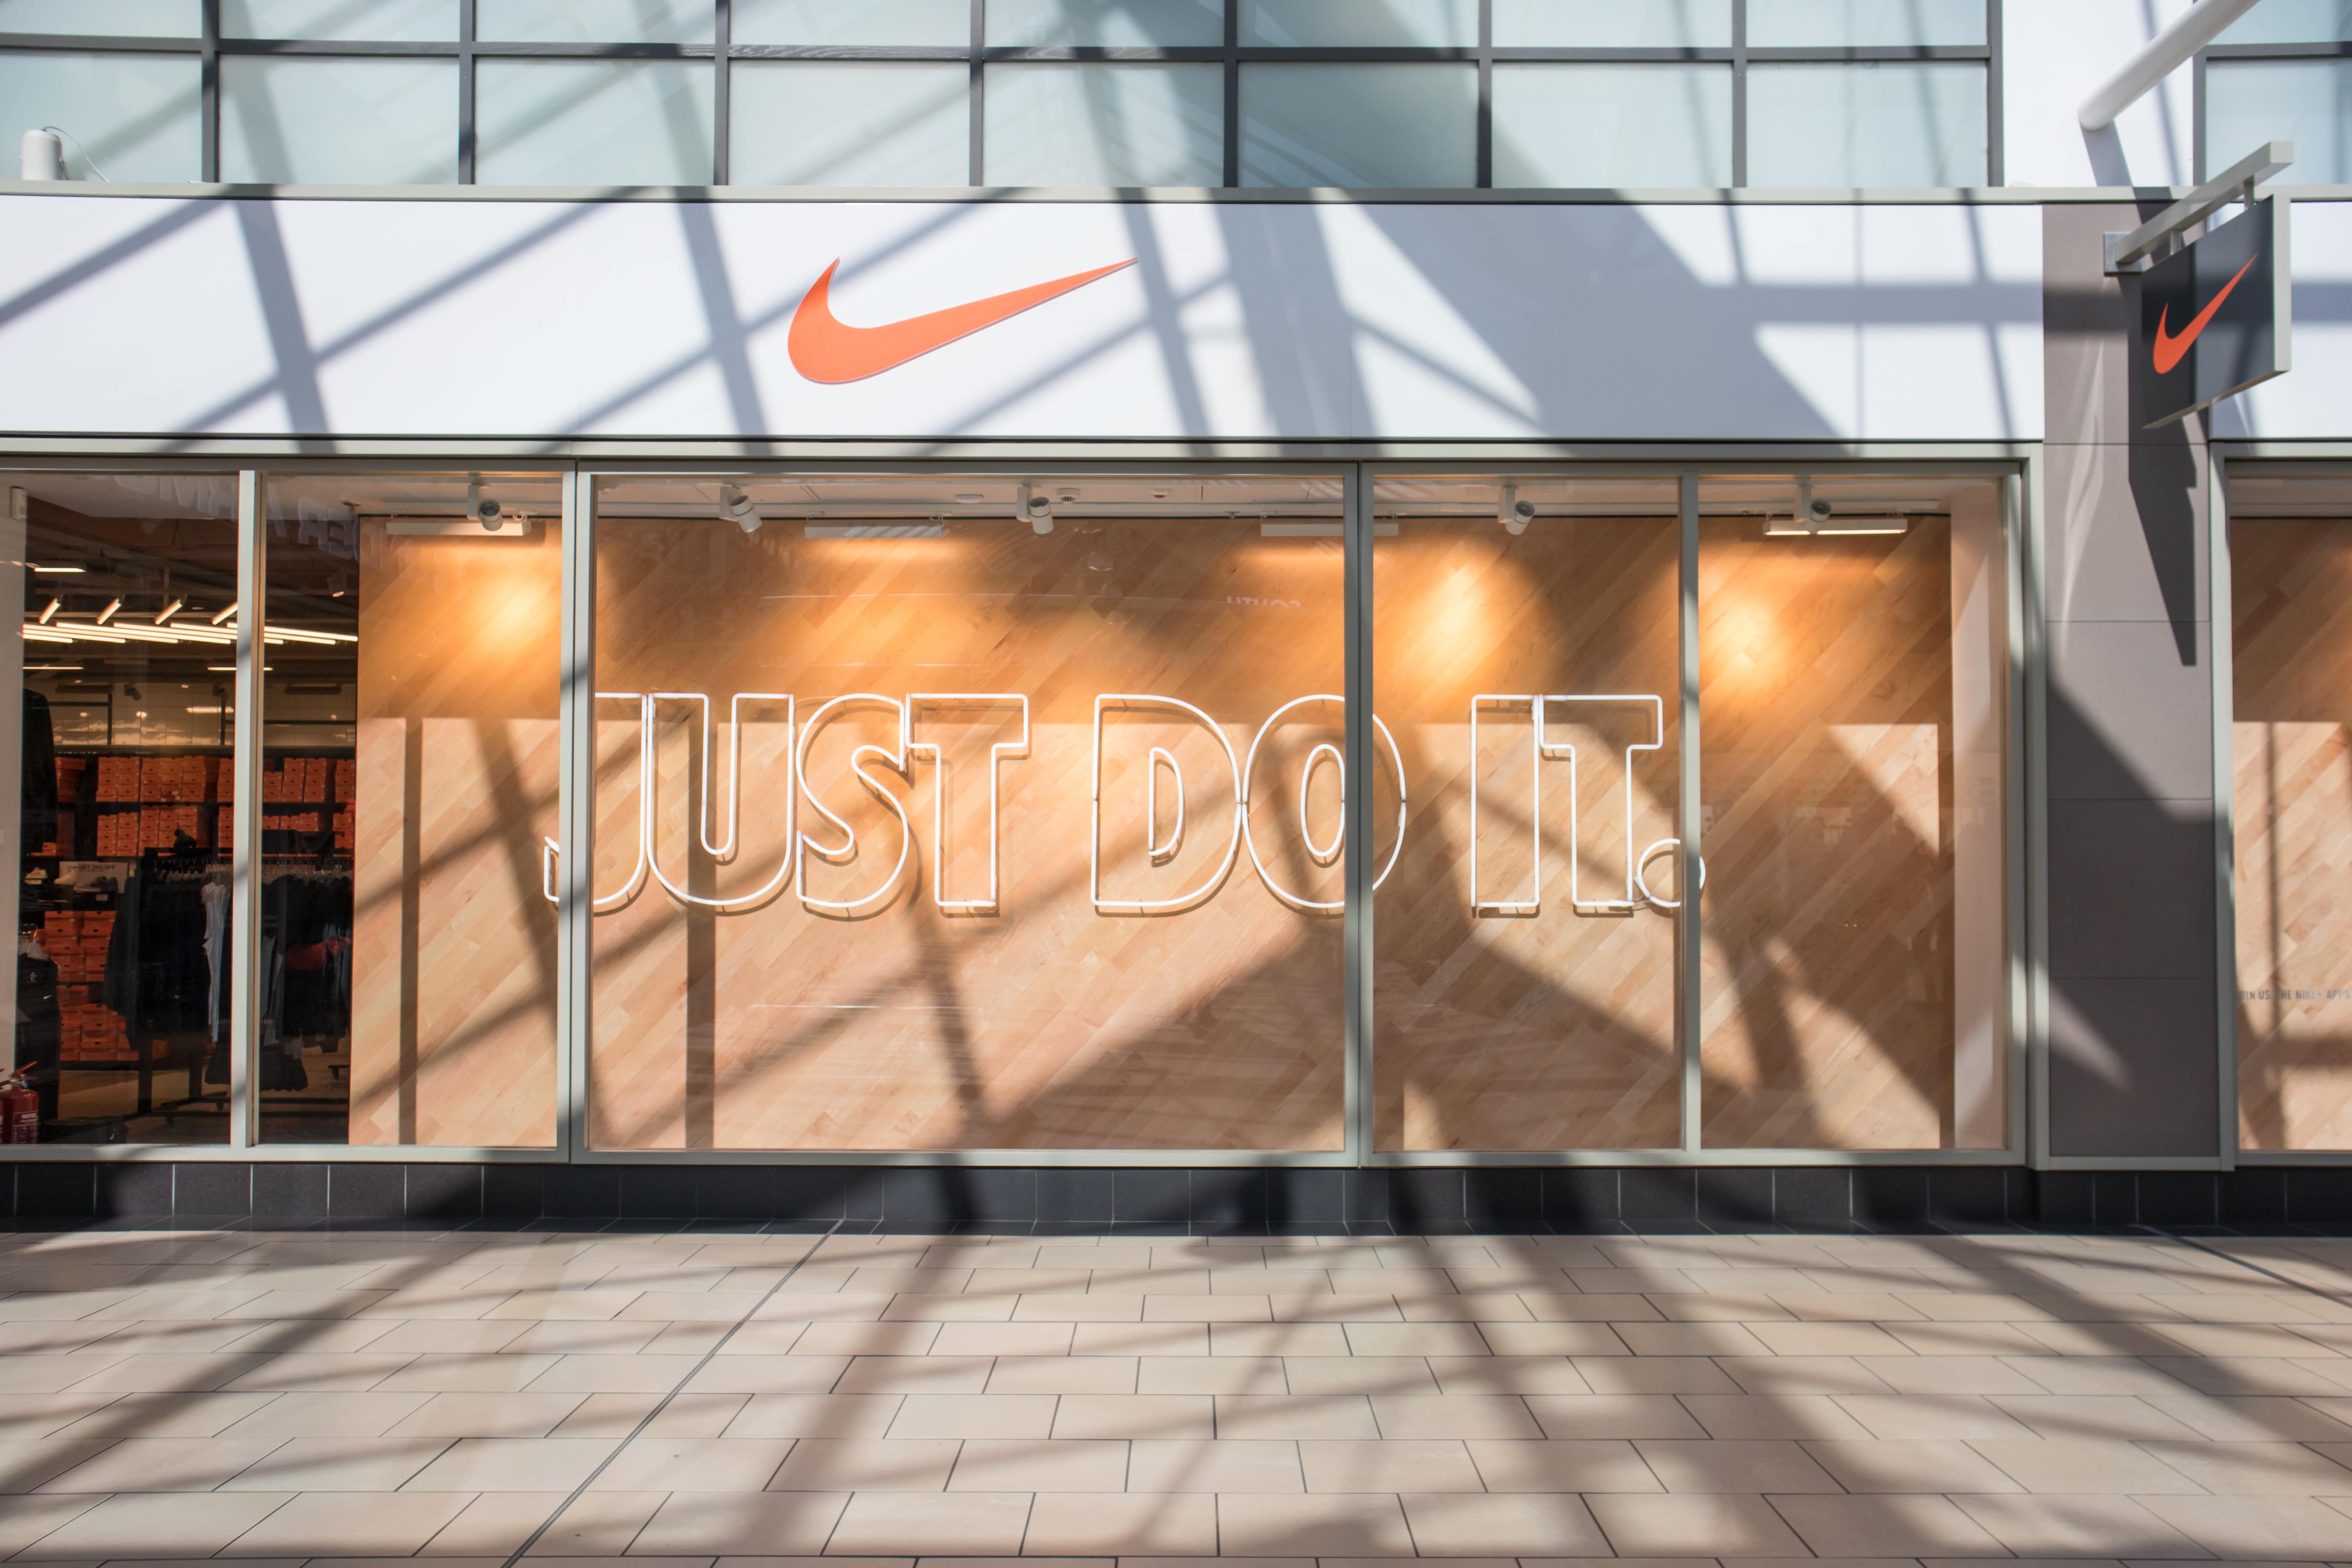 Nike store with just do it logo hanging at the top